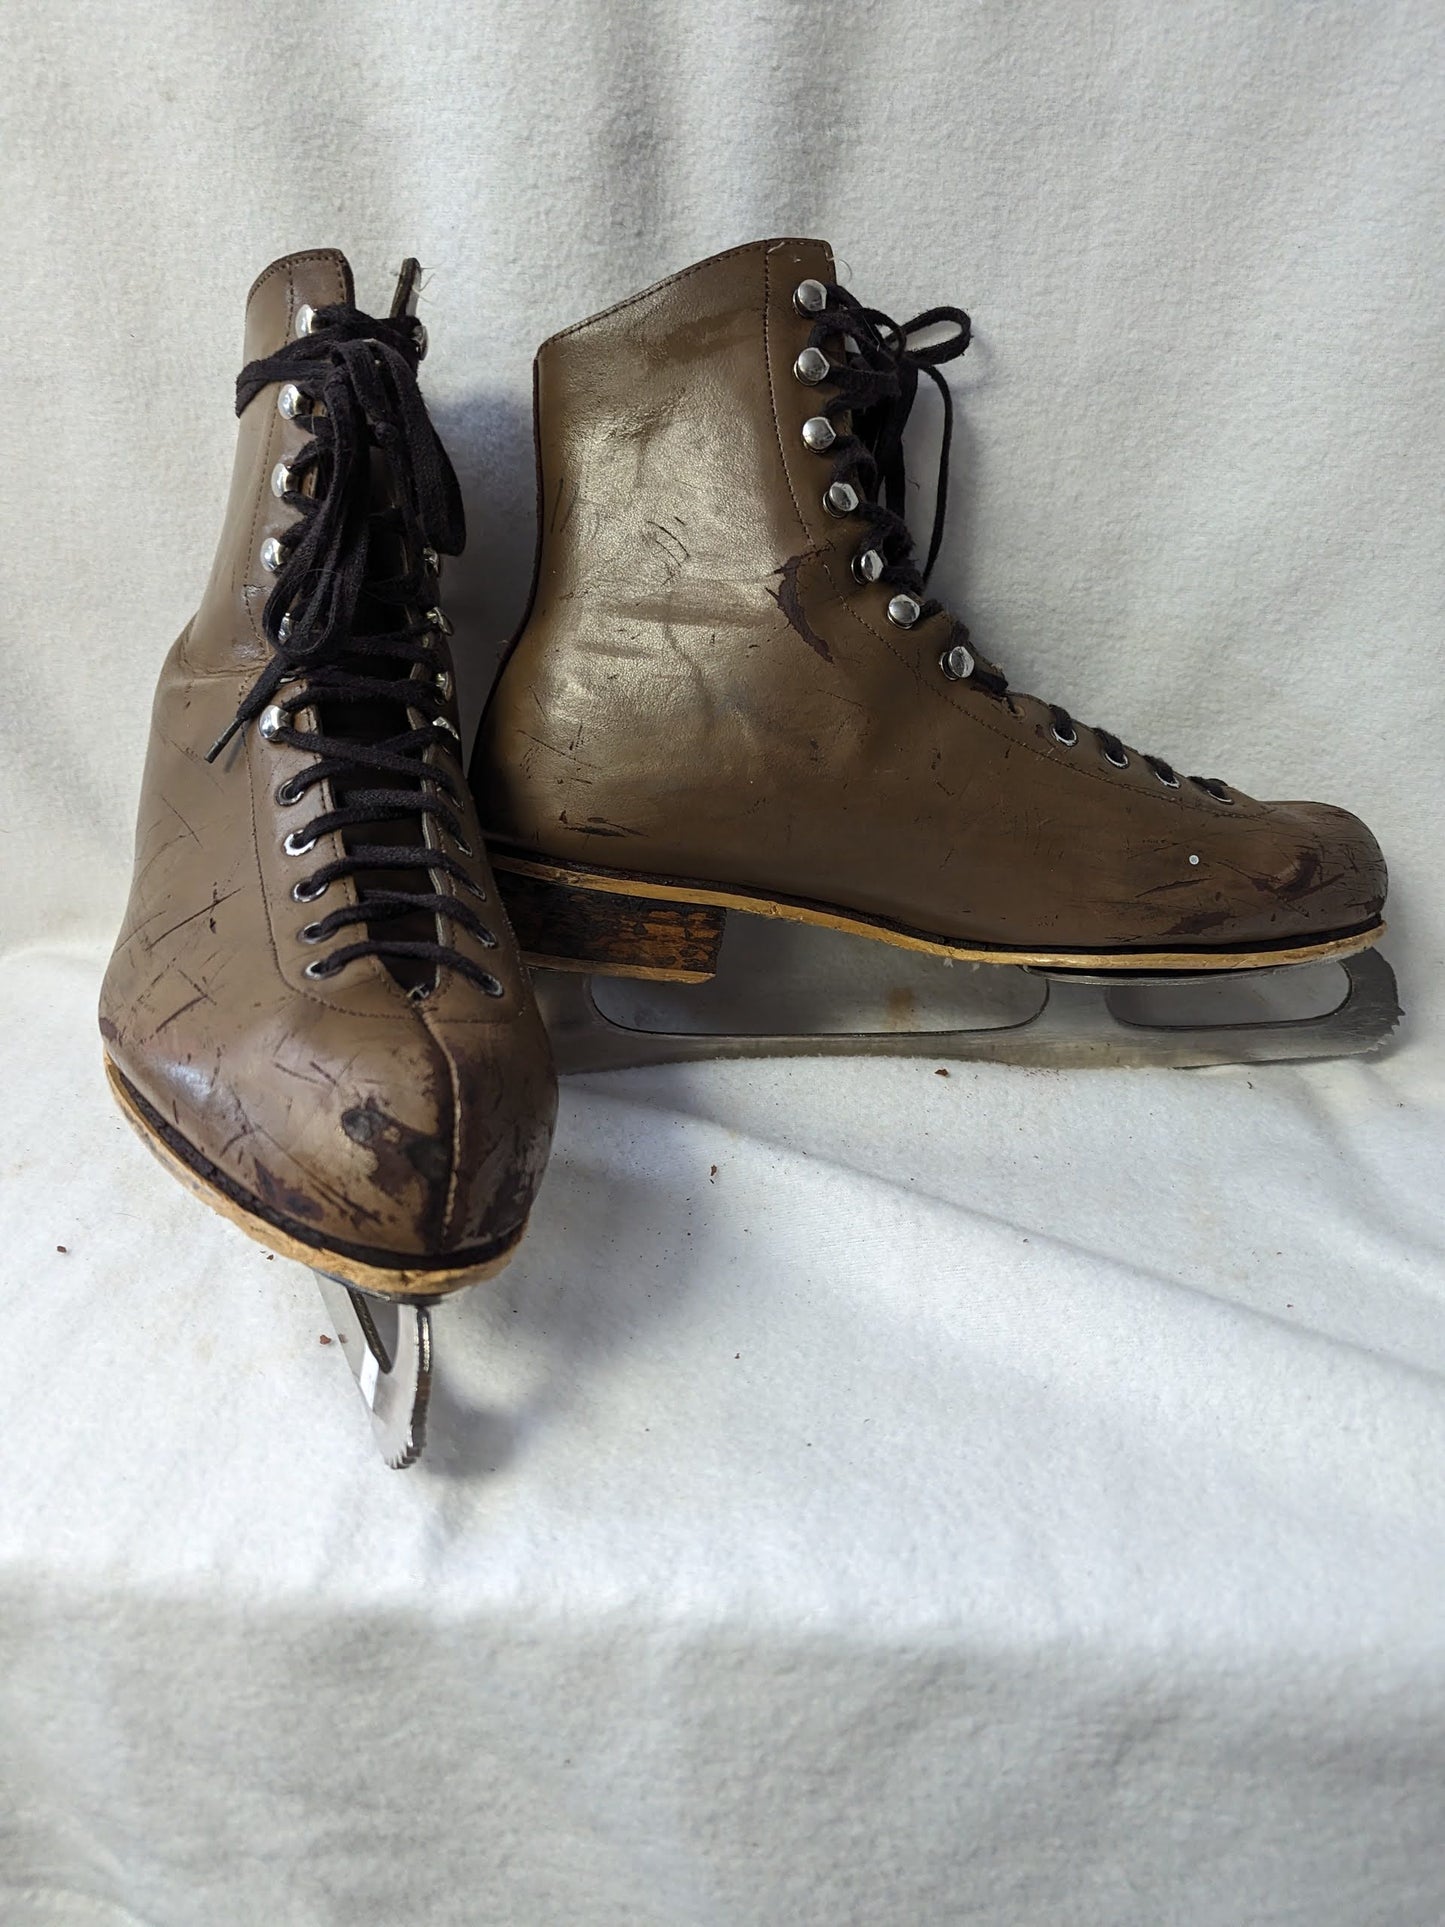 Rink Master Ice Skates Size 11 Color Brown Condition Used